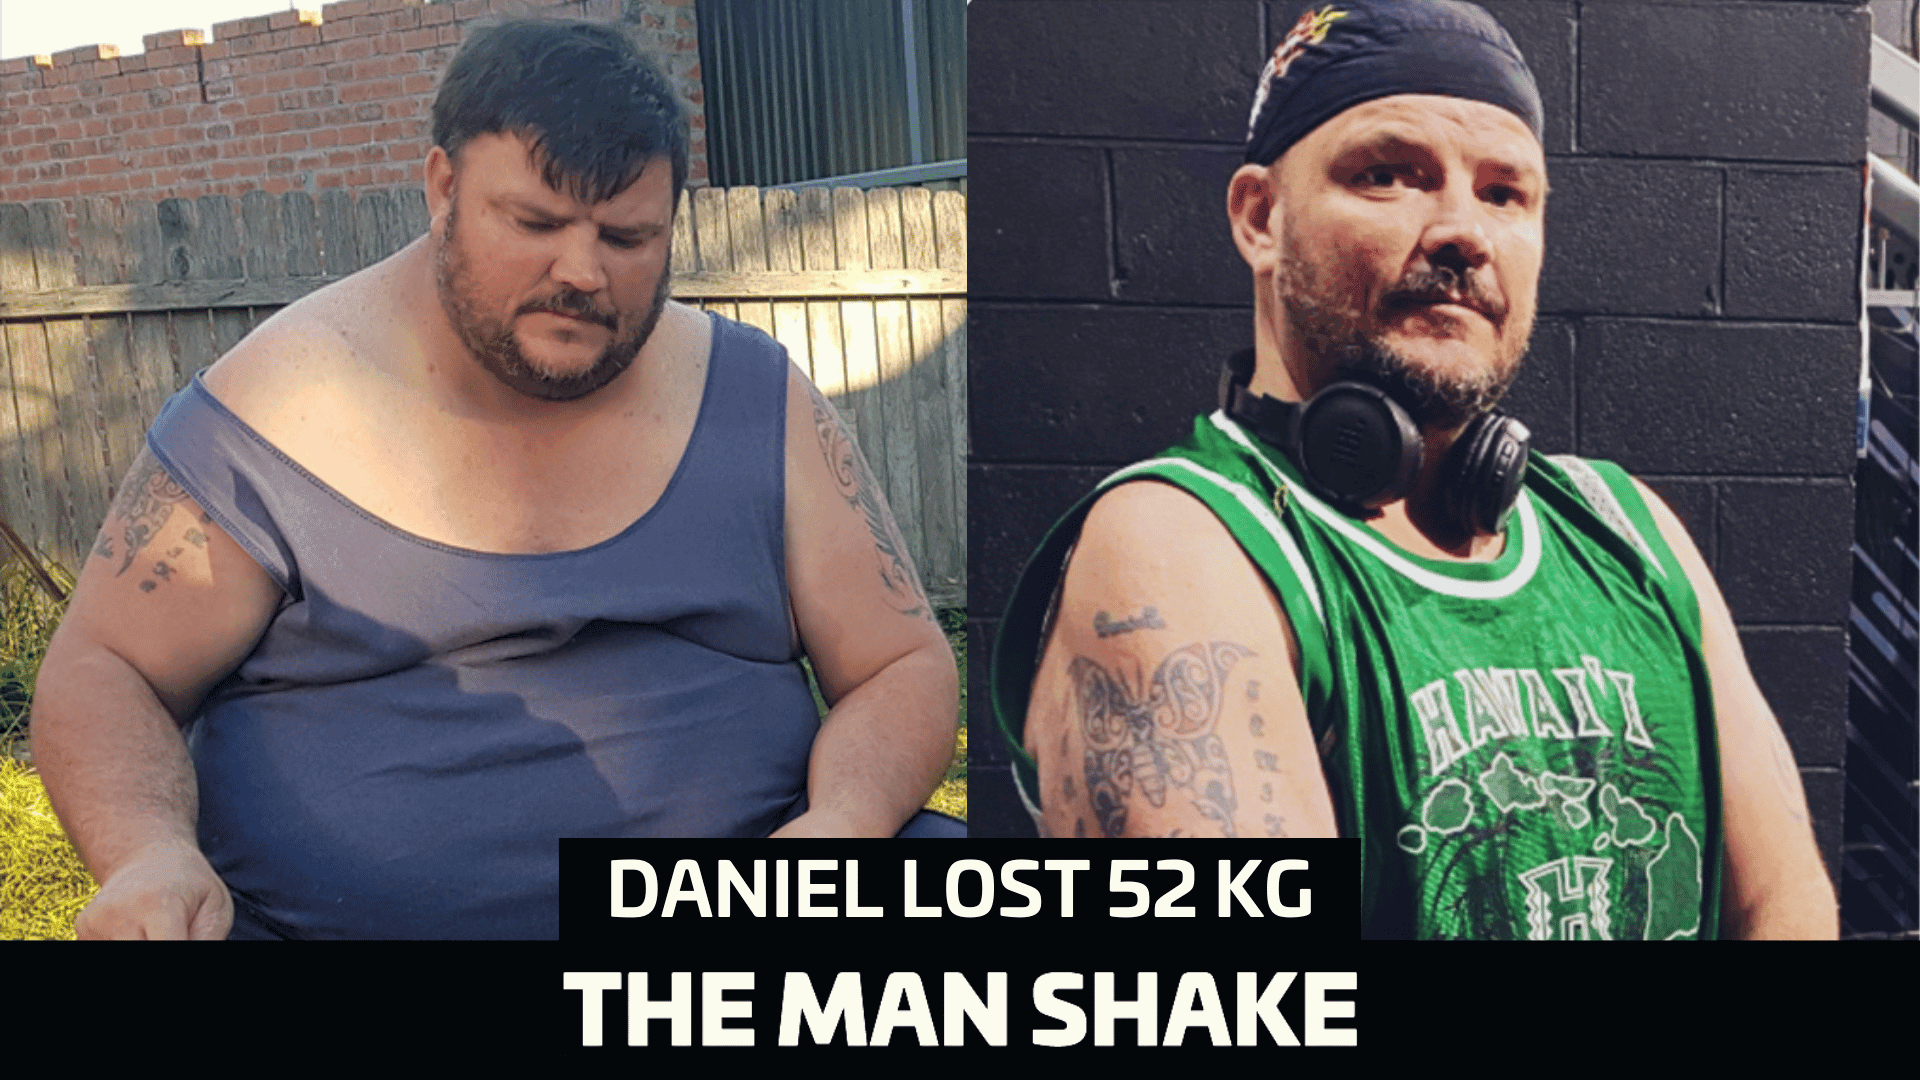 Daniel lost 52kg for his family